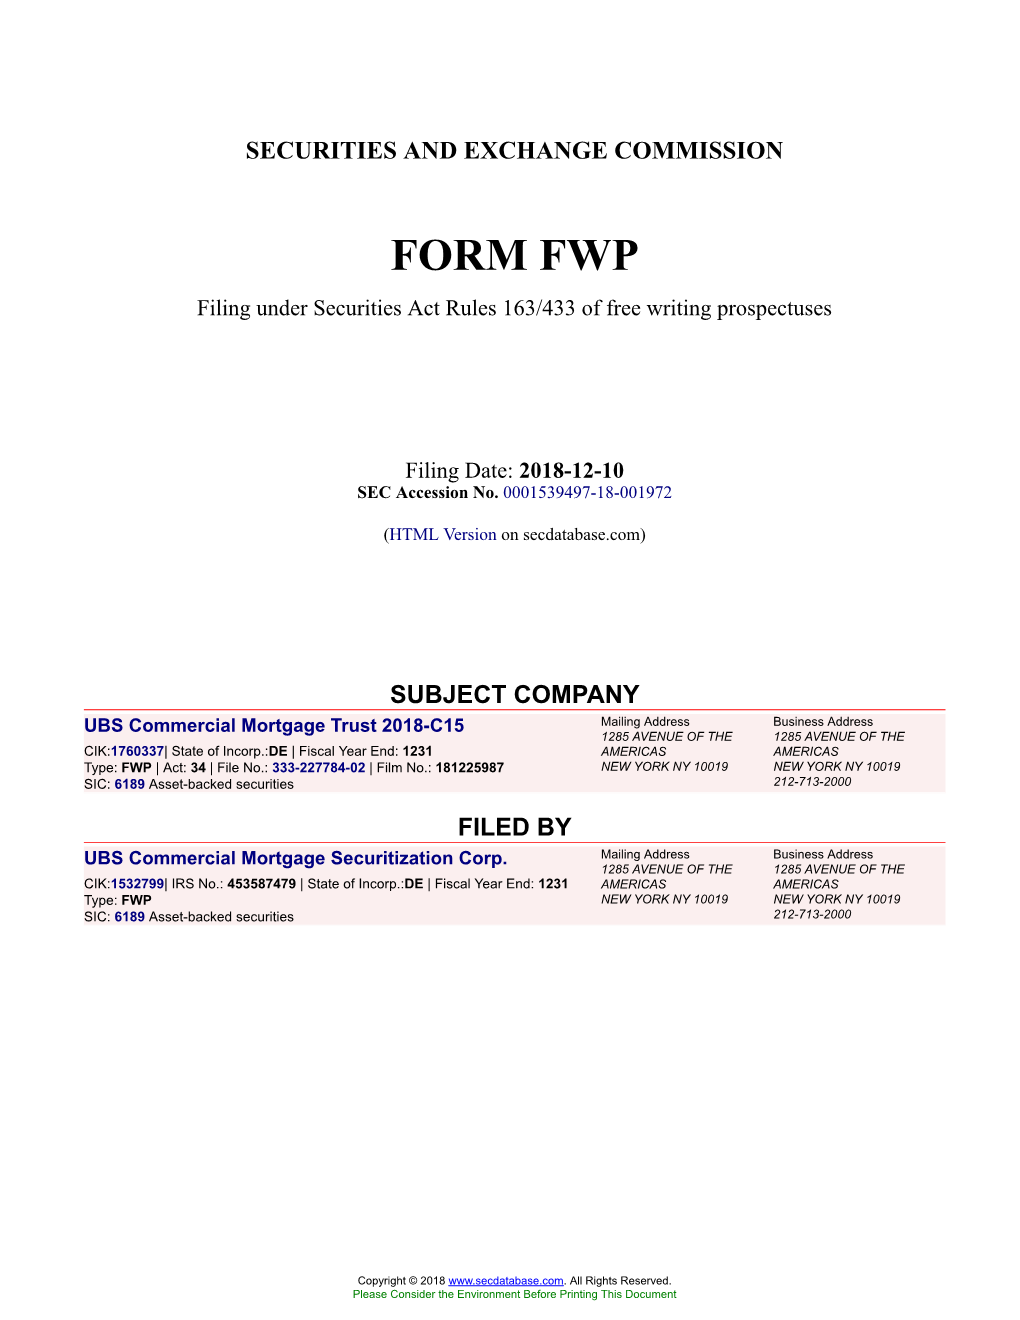 UBS Commercial Mortgage Trust 2018-C15 Form FWP Filed 2018-12